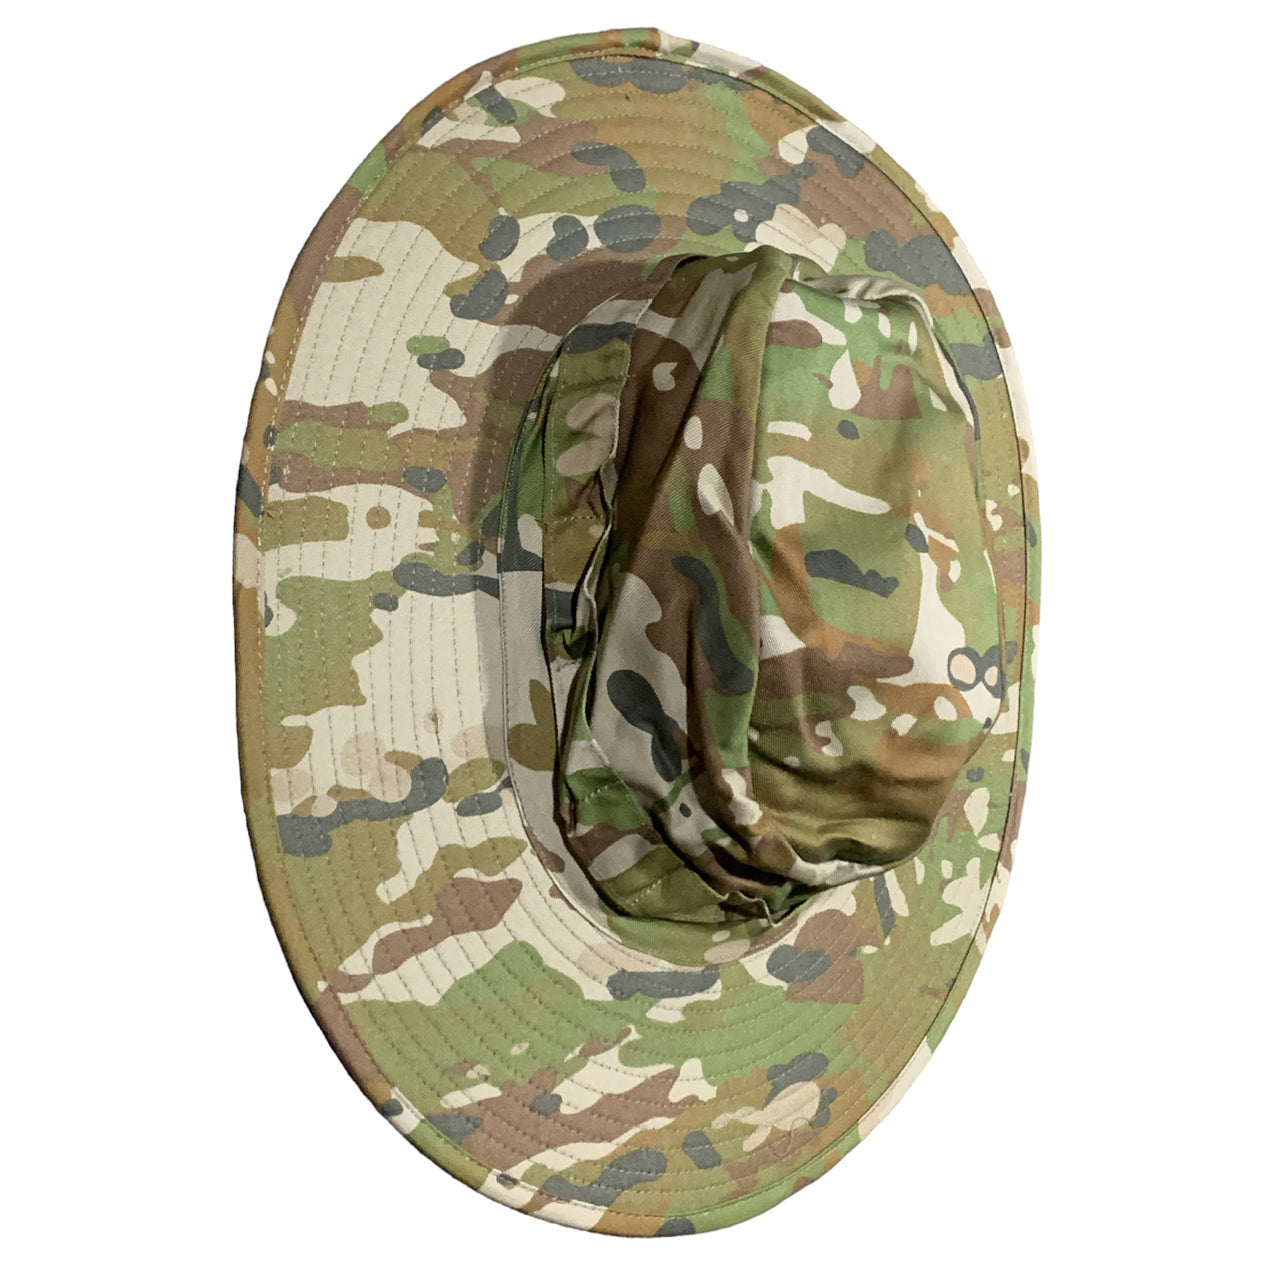 Experience the ultimate in style and functionality with the Army Australian Multicam Wide Brimmed Boonie Hat AMCU. Featuring a classic slouch hat design with a trendy 83 mm wide brim, this hat also includes a convenient cord chinstrap and cord lock www.defenceqstore.com.au side view amcu